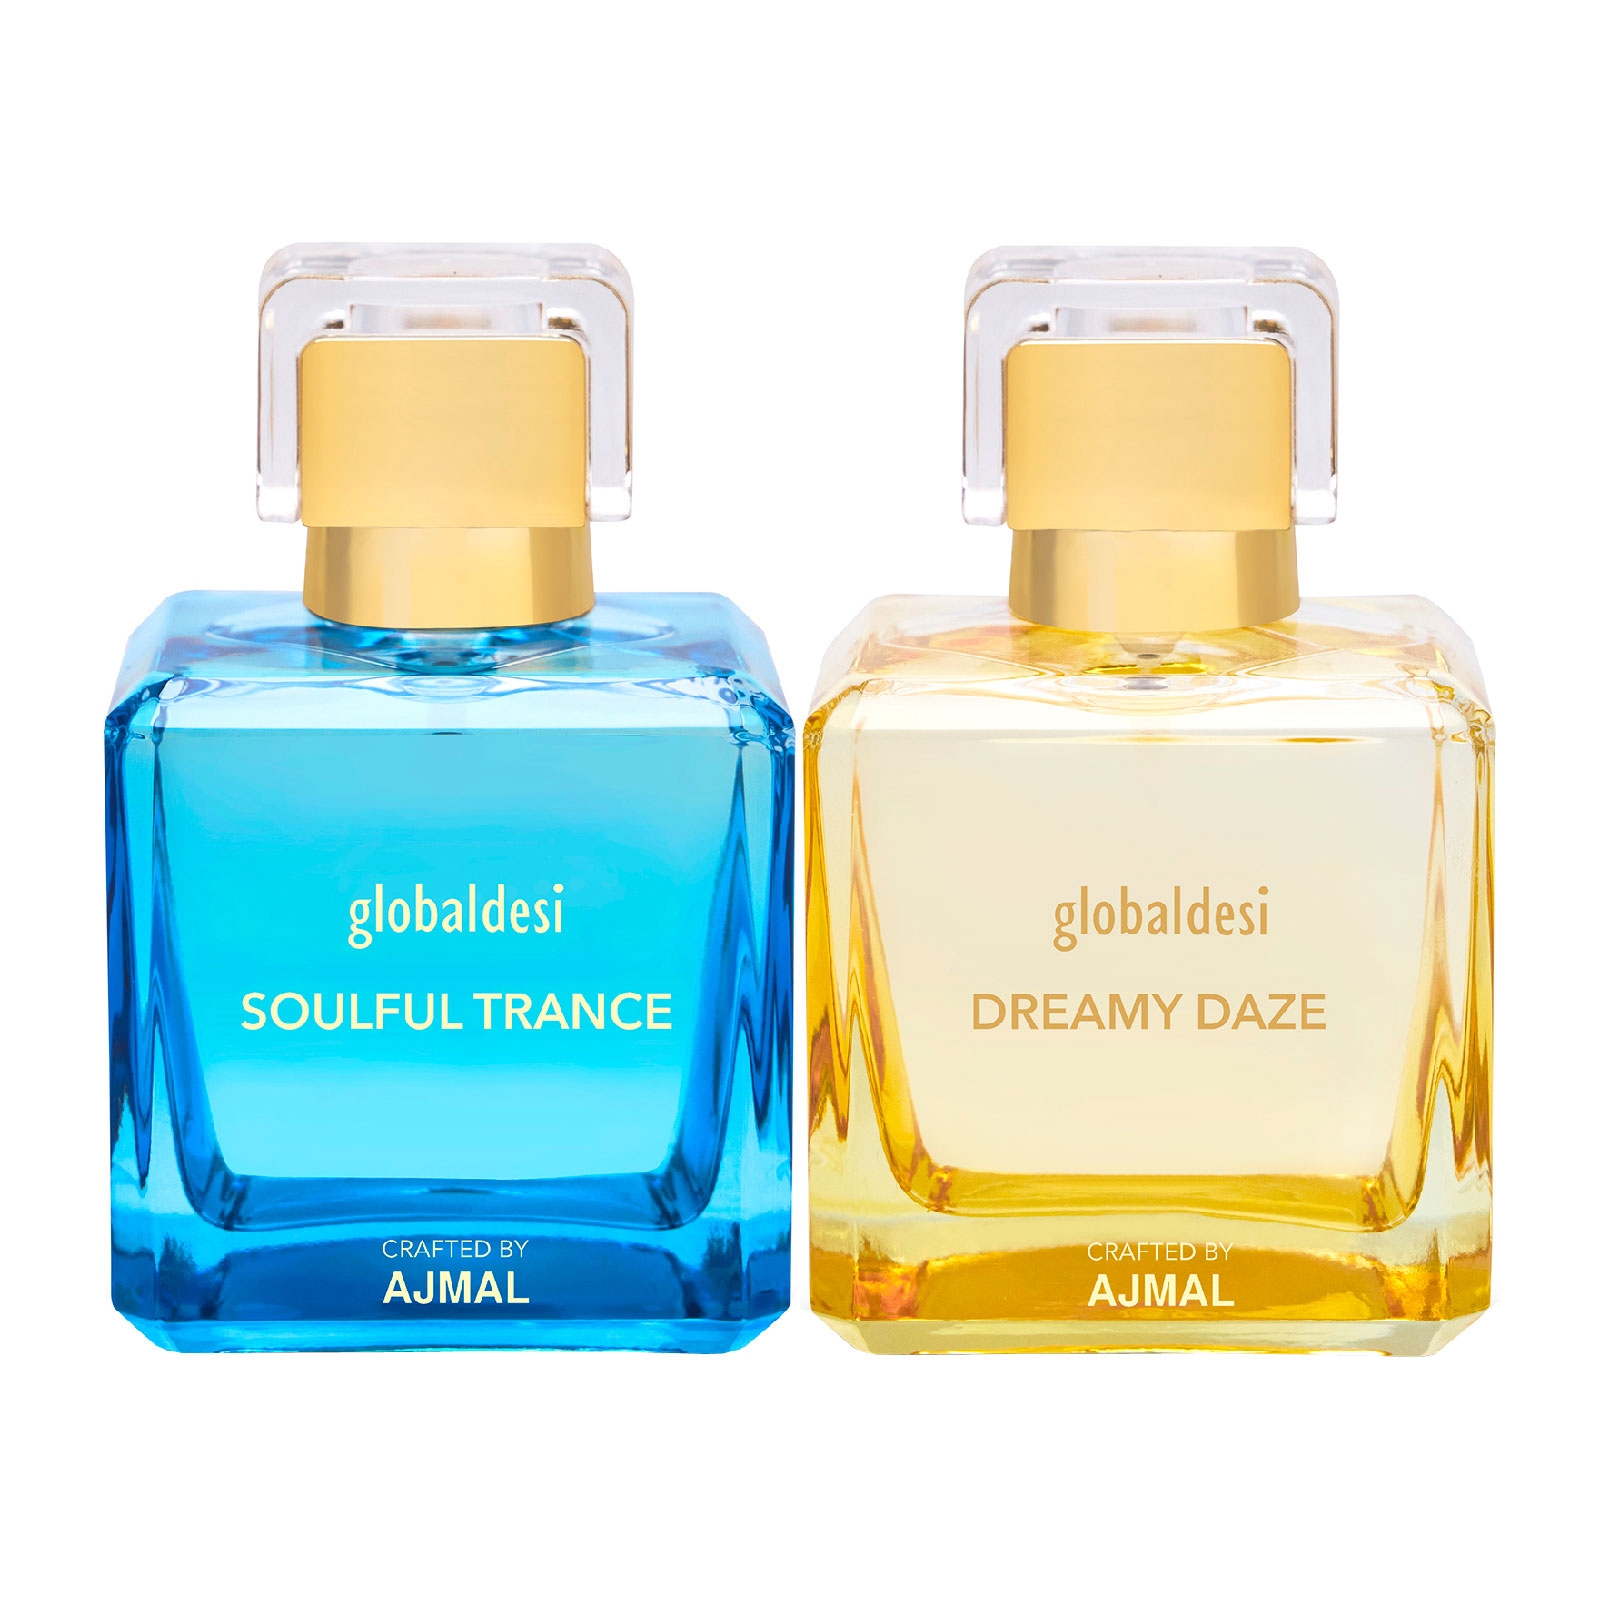 Global Desi Crafted By Ajmal | Global Desi Soulful Trance & Dreamy Daze Pack of 2 Eau De Parfum 50ML for Women Crafted by Ajmal + 2 Parfum Testers